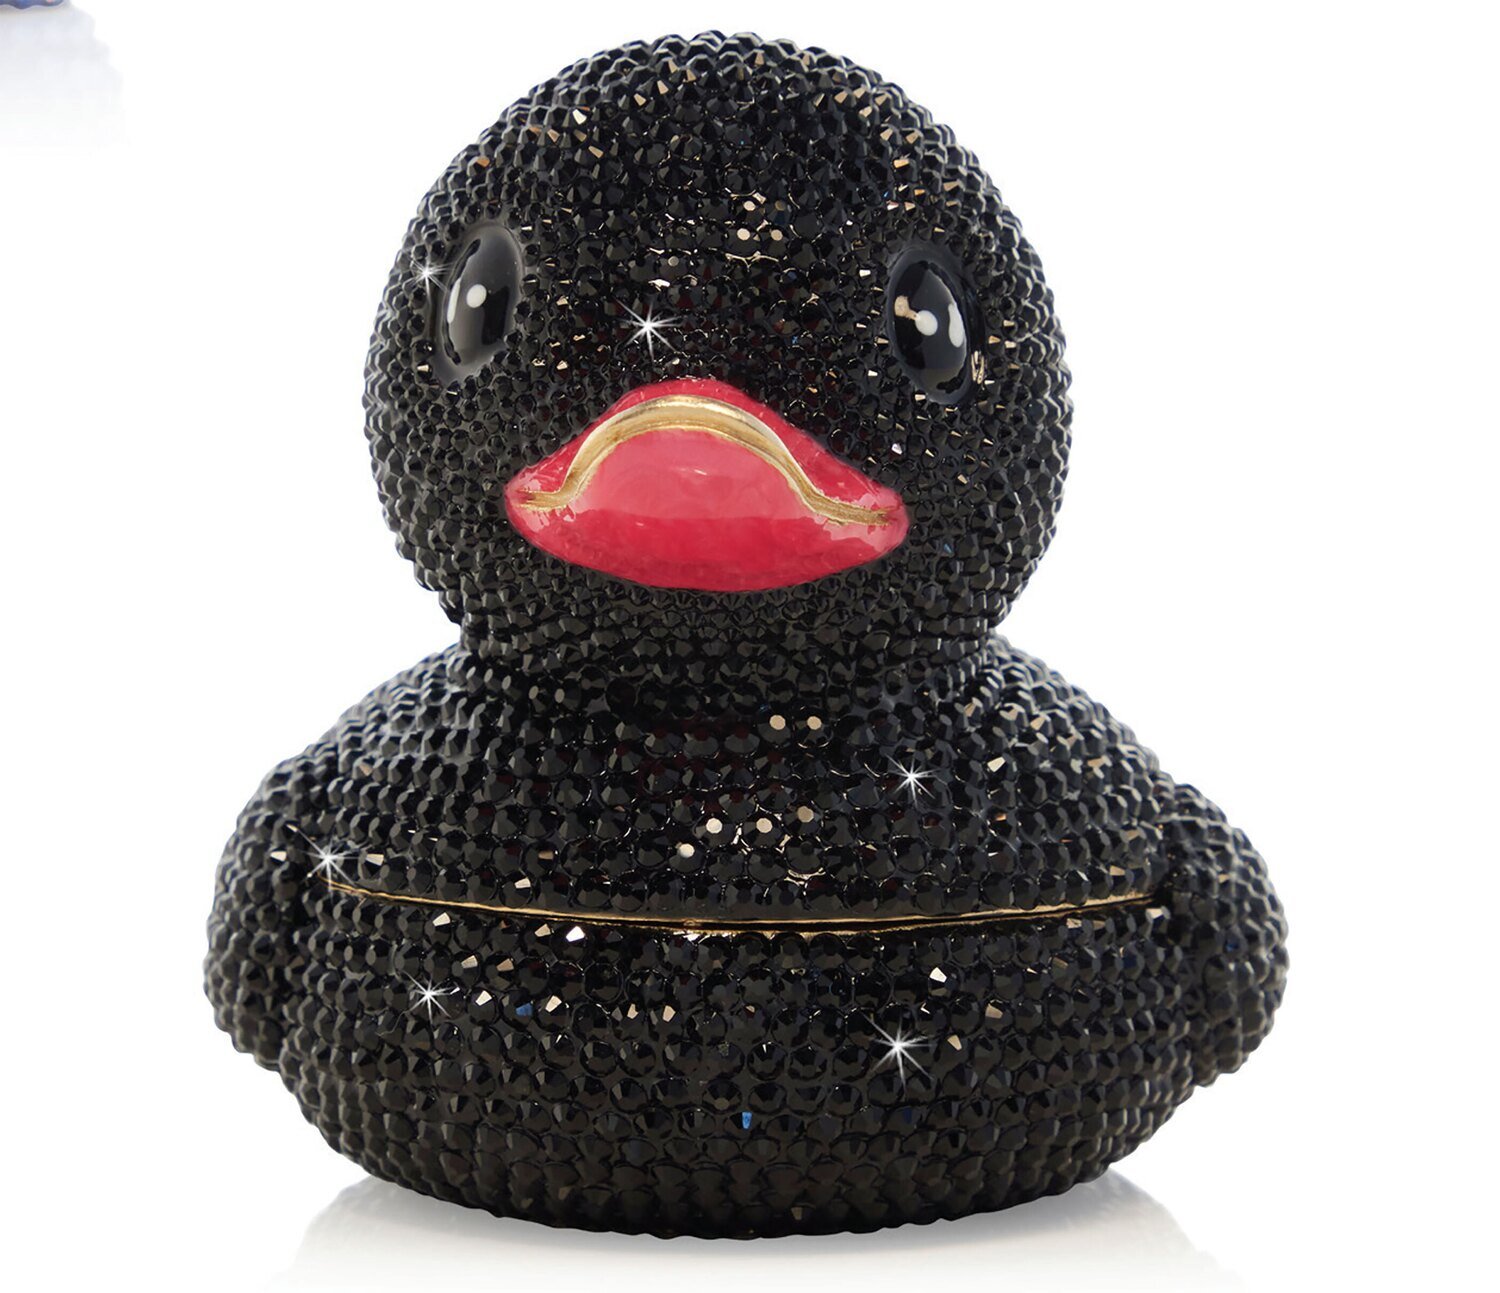 Jay Strongwater Ernie Pave Rubber Ducky Box- Black & Pink SDH7409-202